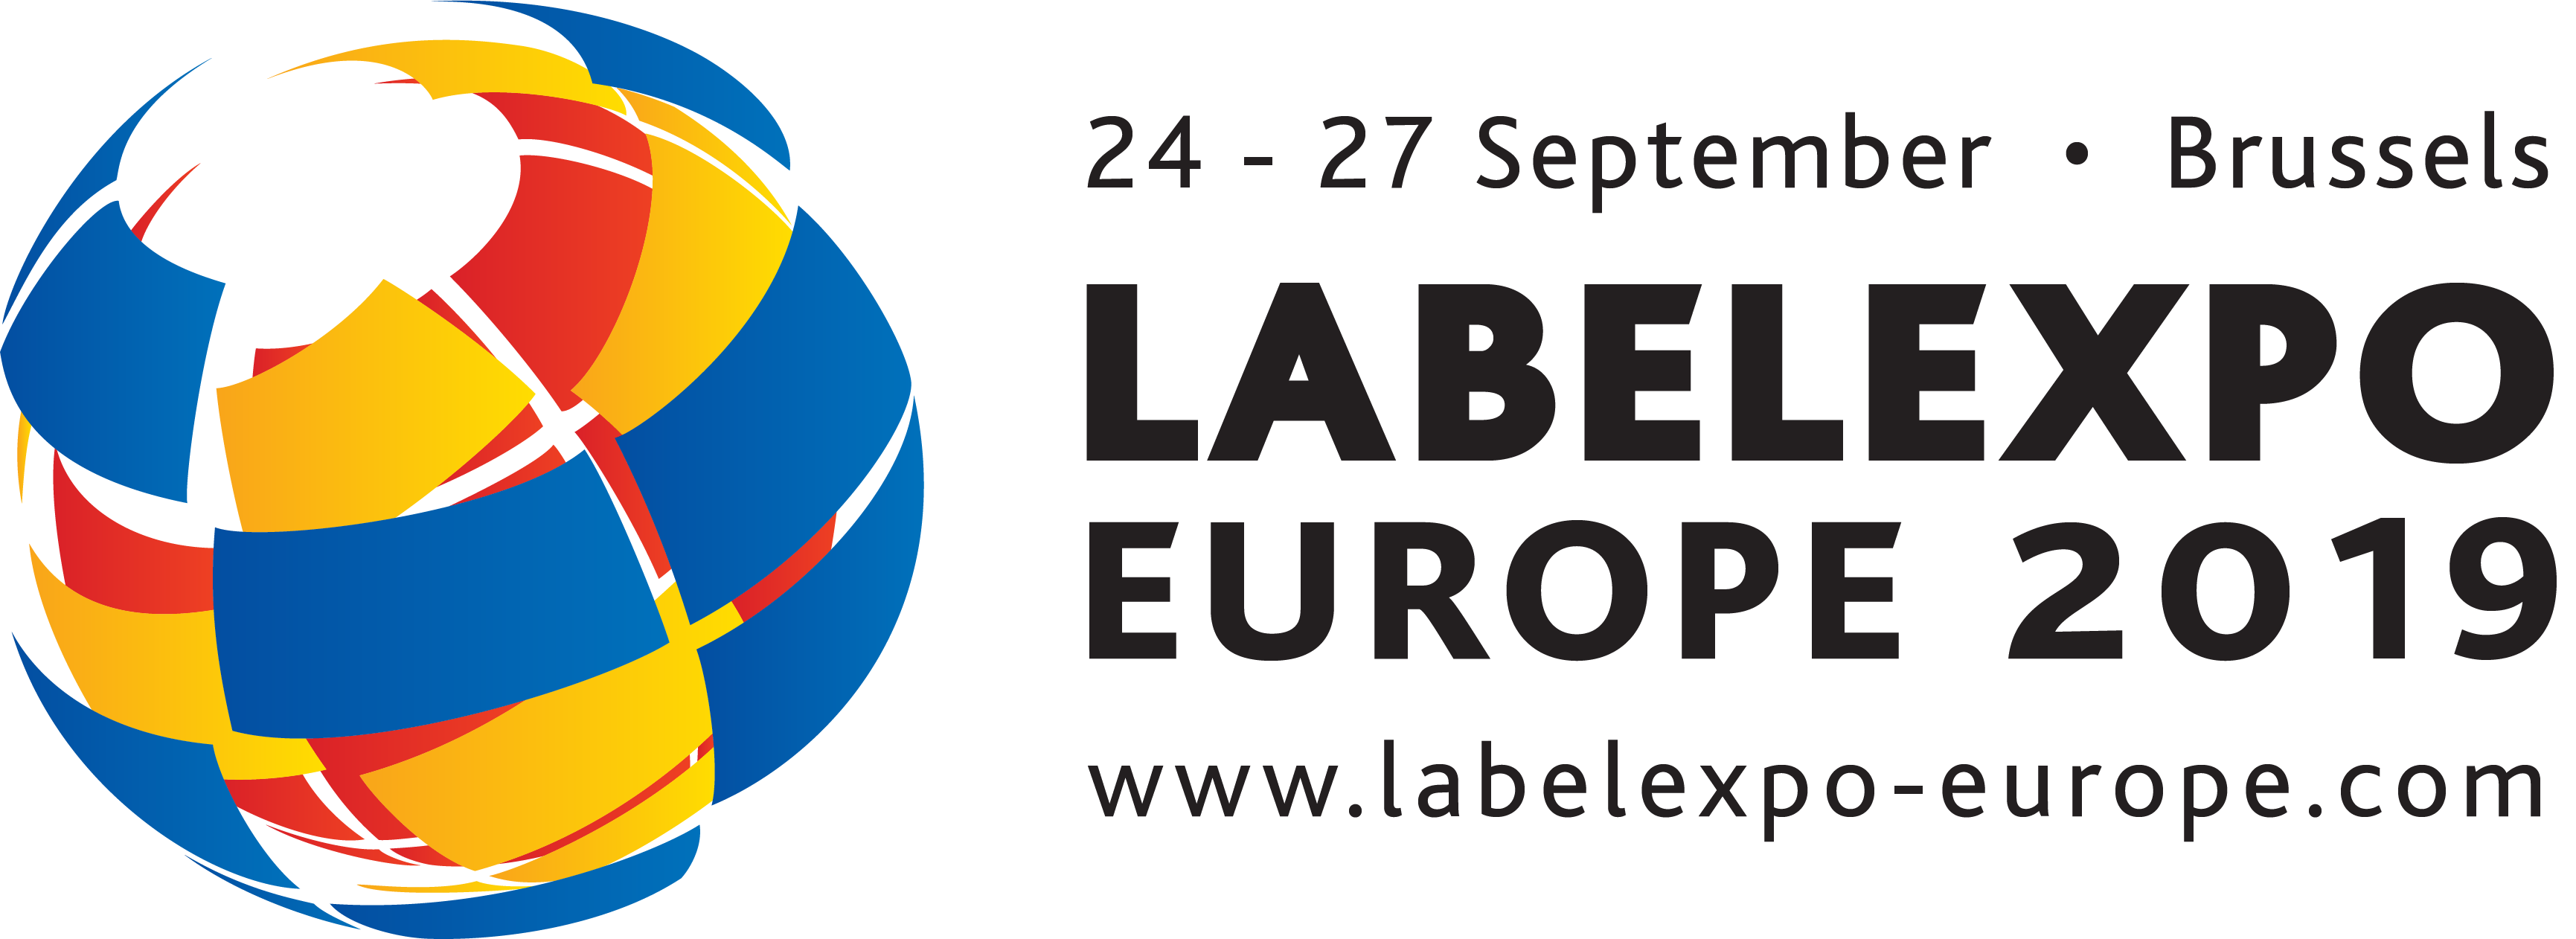 Labelexpo to present most extensive educational schedule to date